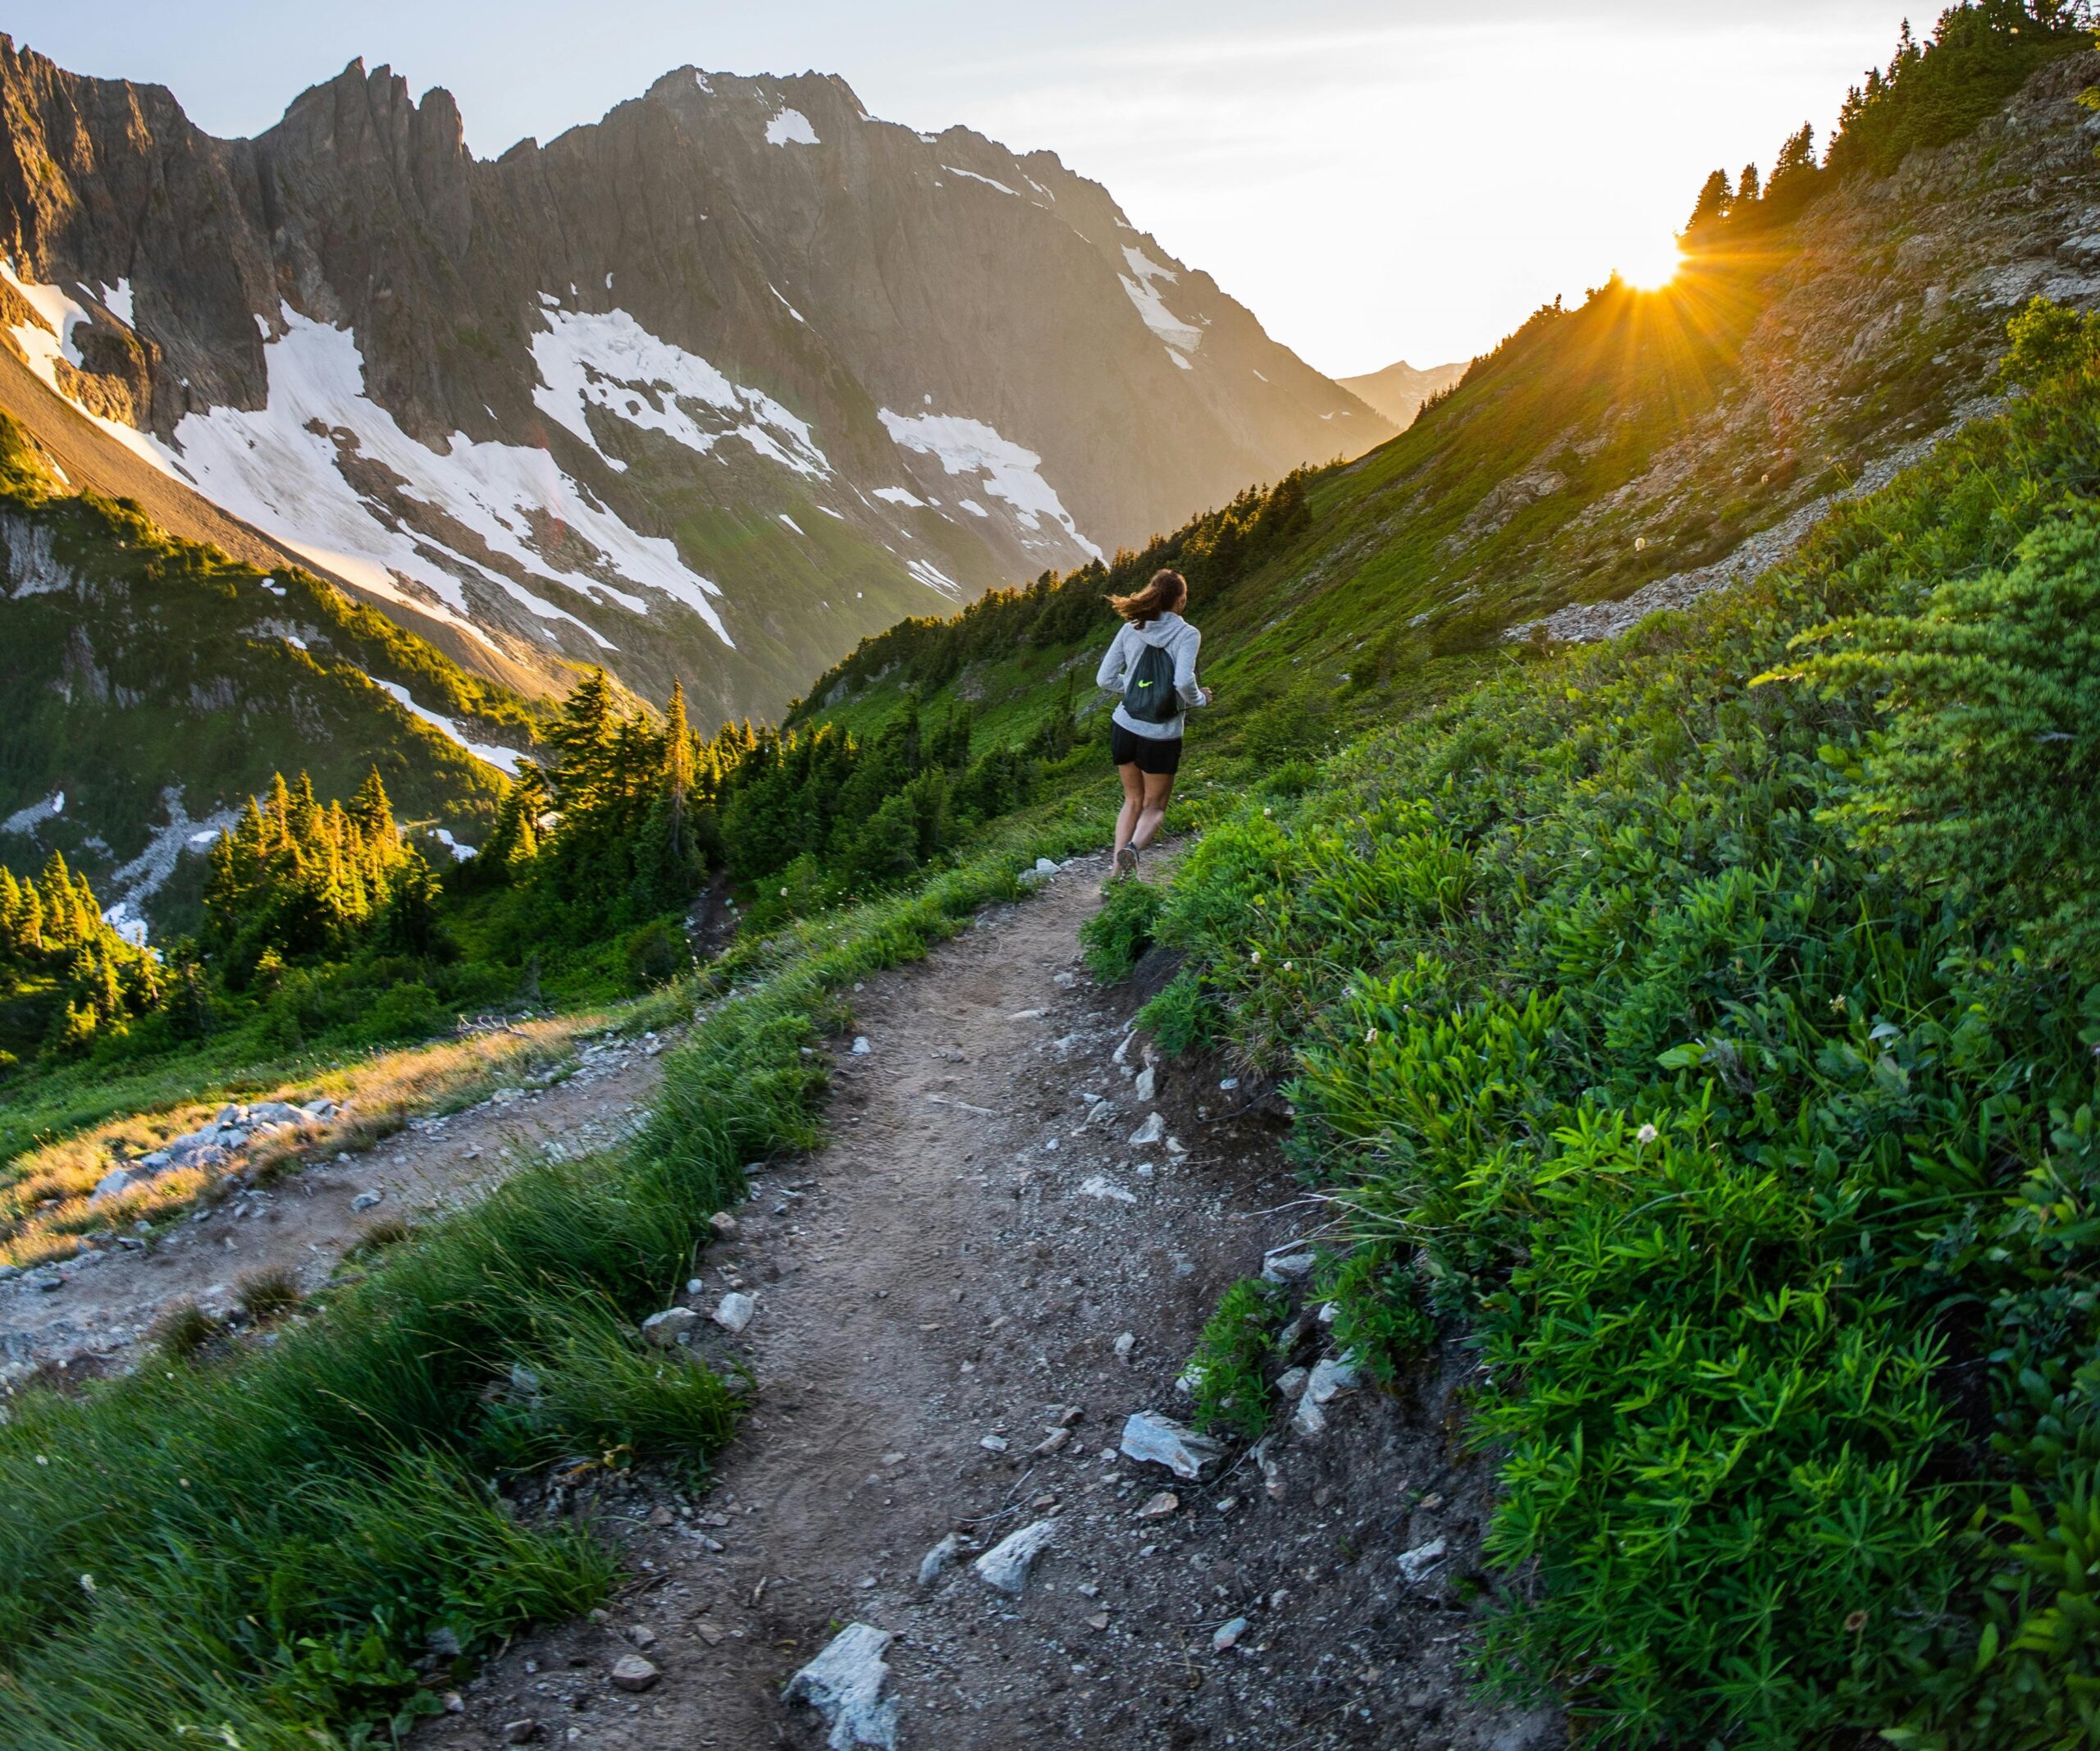 A photograph of a lone person runs on a trail with a spectacular backdrop of craggy mountains. The trail is on the side of the steep hillside, and the sun is slipping out of view.